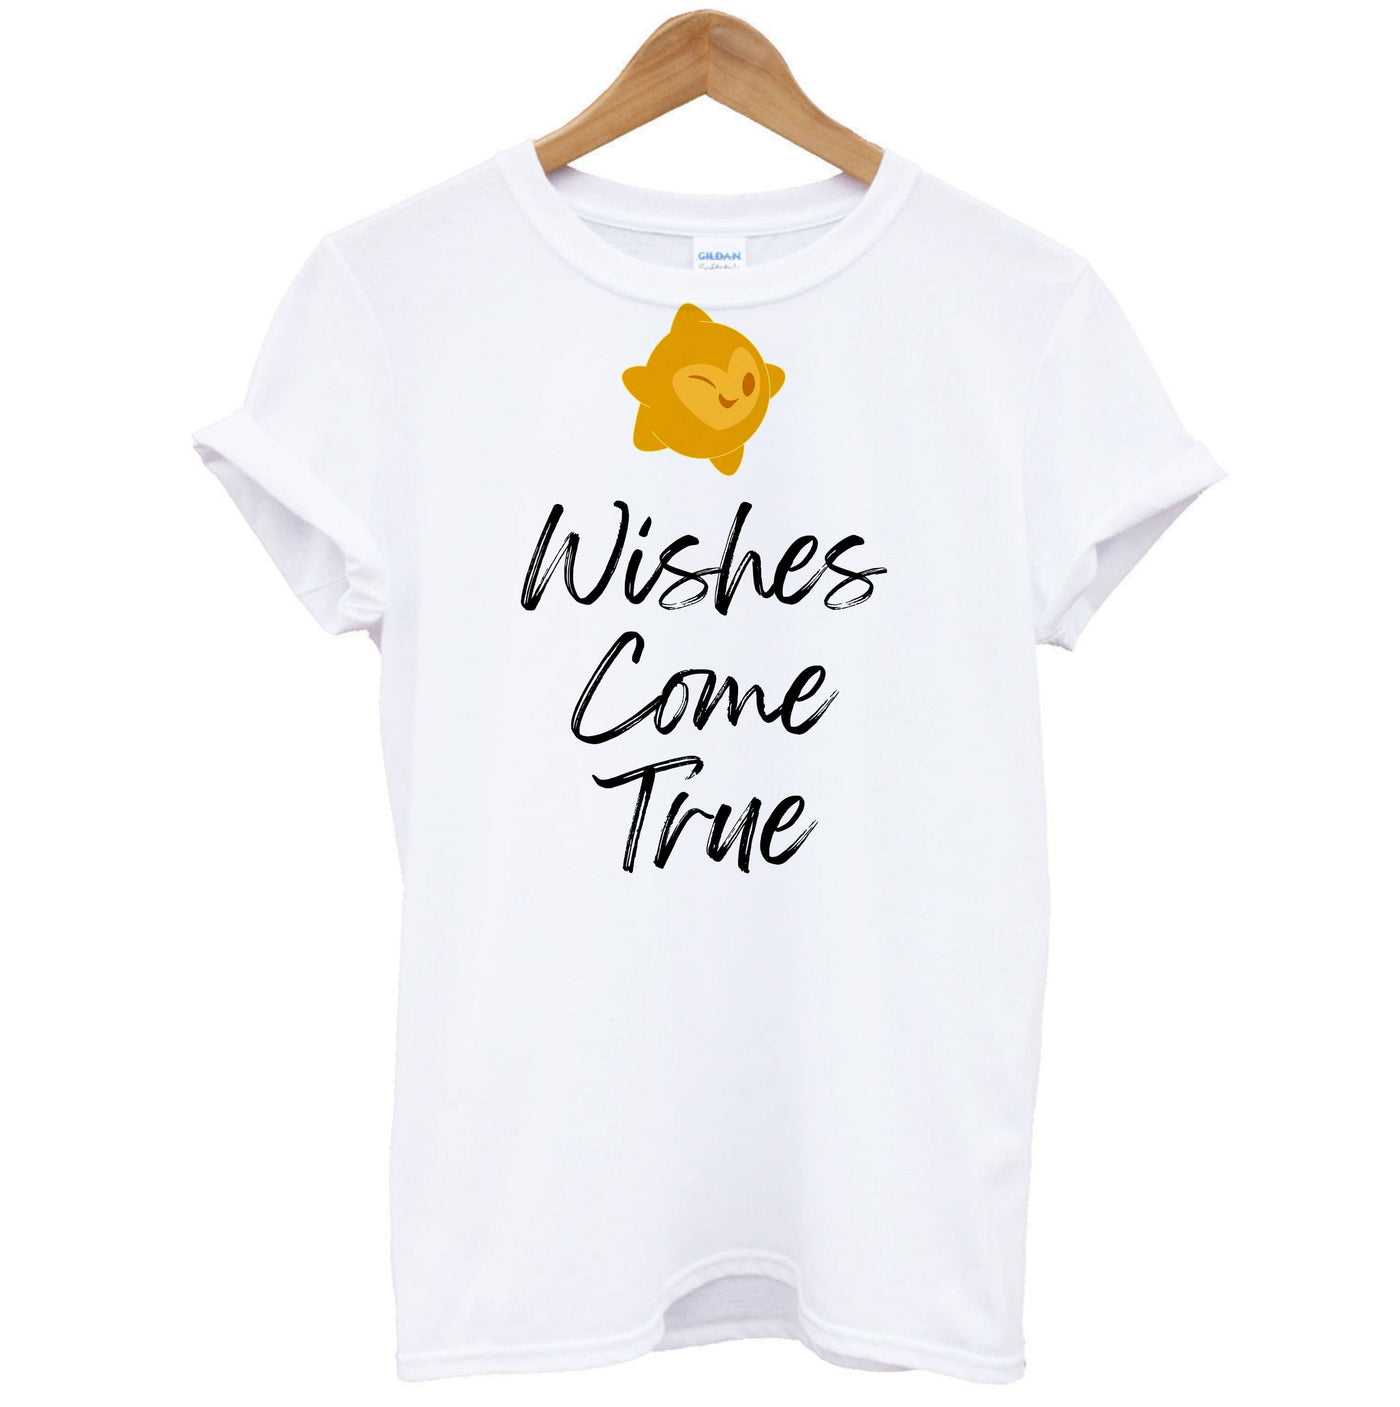 Wishes Come True - Wish T-Shirt